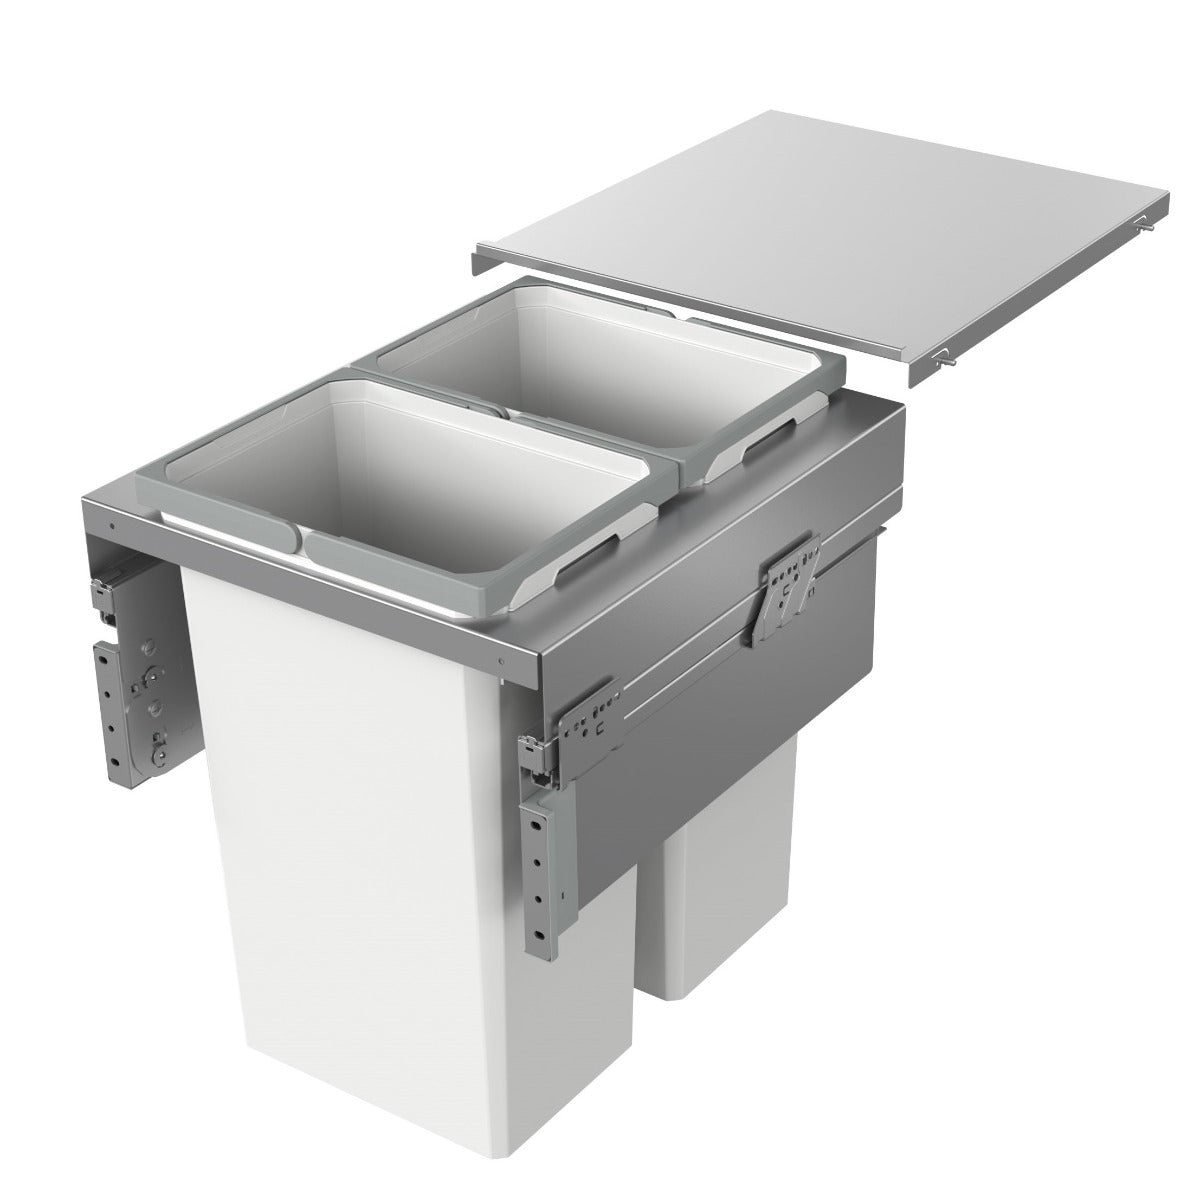 A well-designed integrated kitchen cabinet bin from Vauth-Sagel with two compartments, providing 64 litres of waste and recycling space.